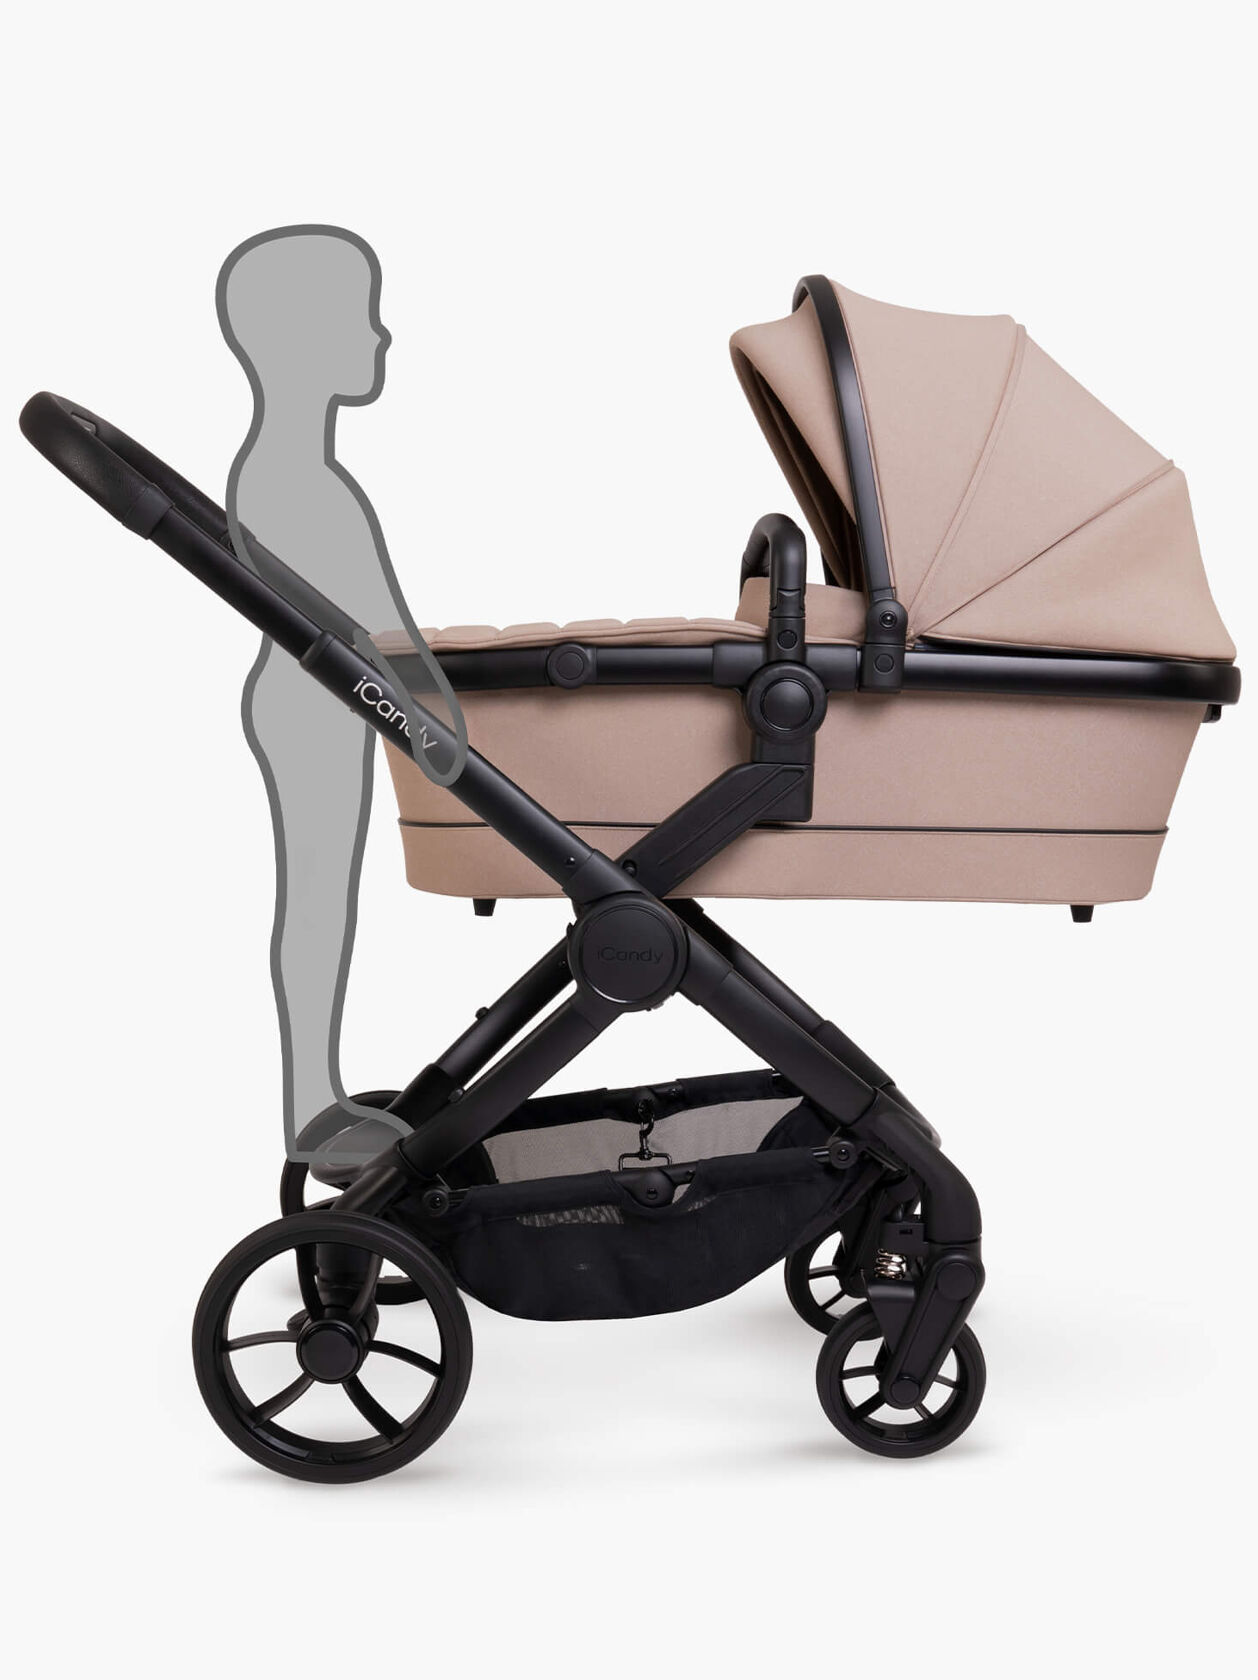 Peach 7 Pushchair and Carrycot - Complete Bundle